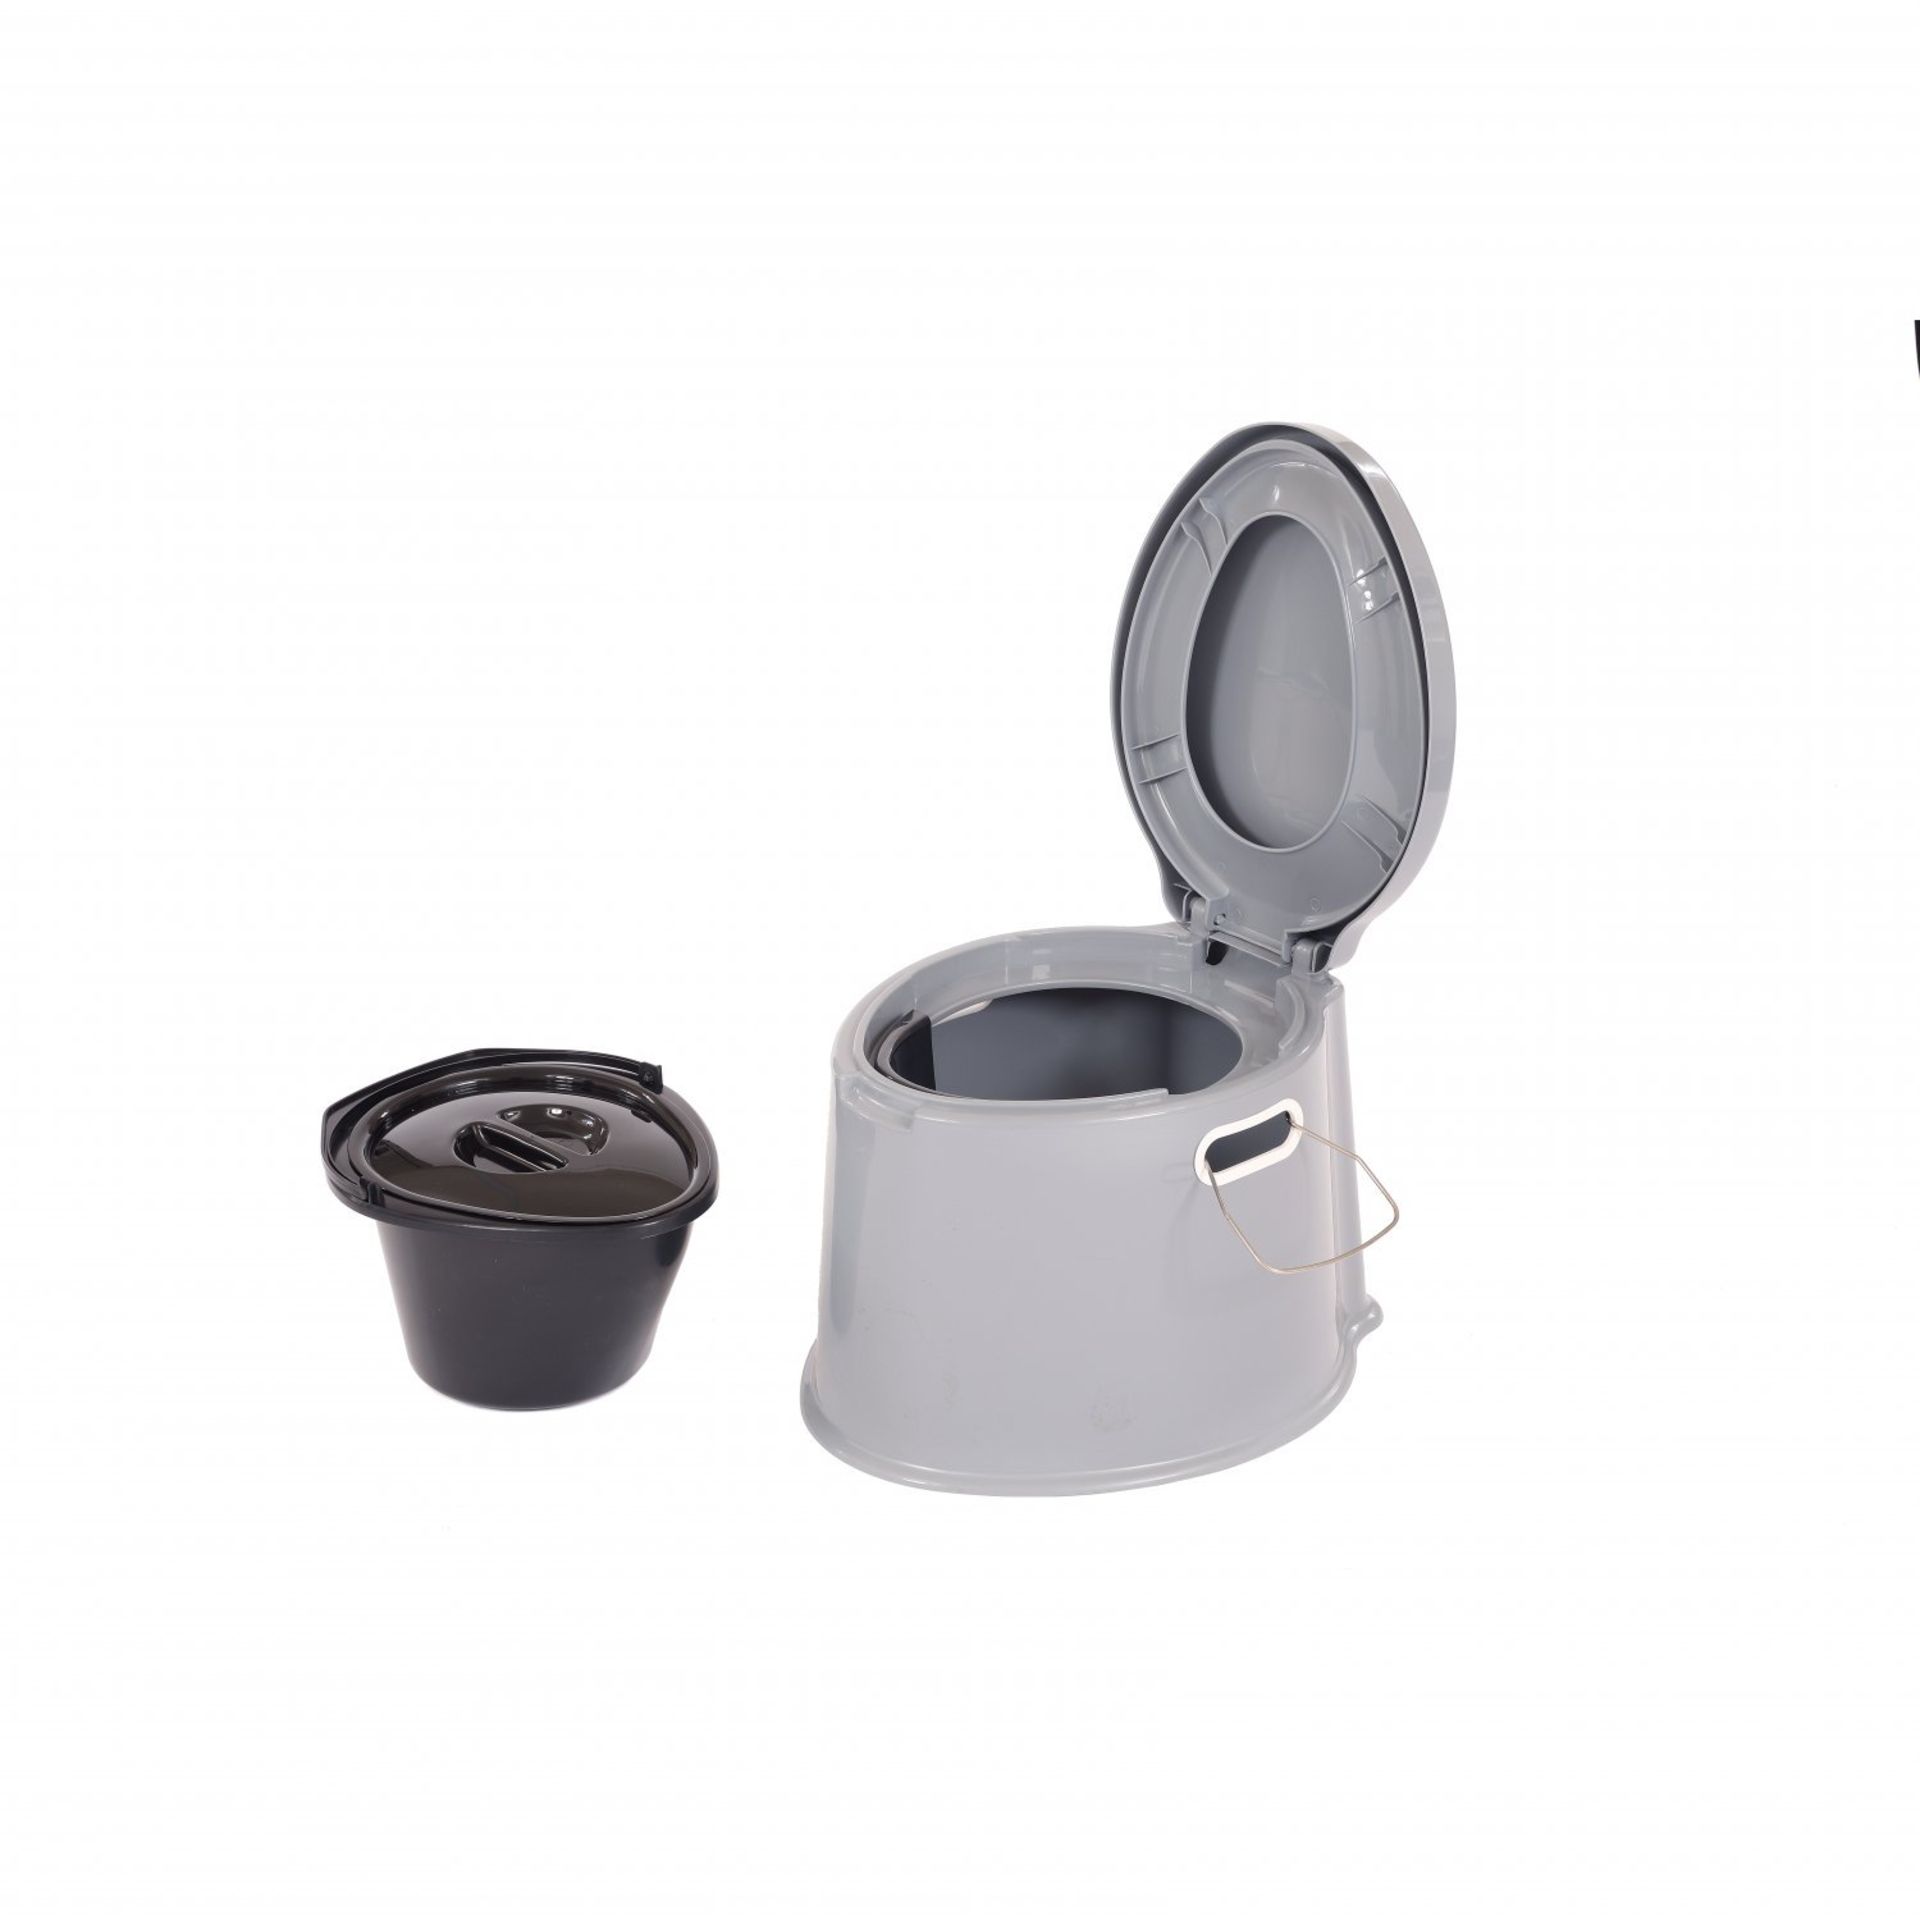 (LF6) 5L Portable Compact Camping Toilet Potty with Removable Bucket The camping toilet al... - Image 2 of 2